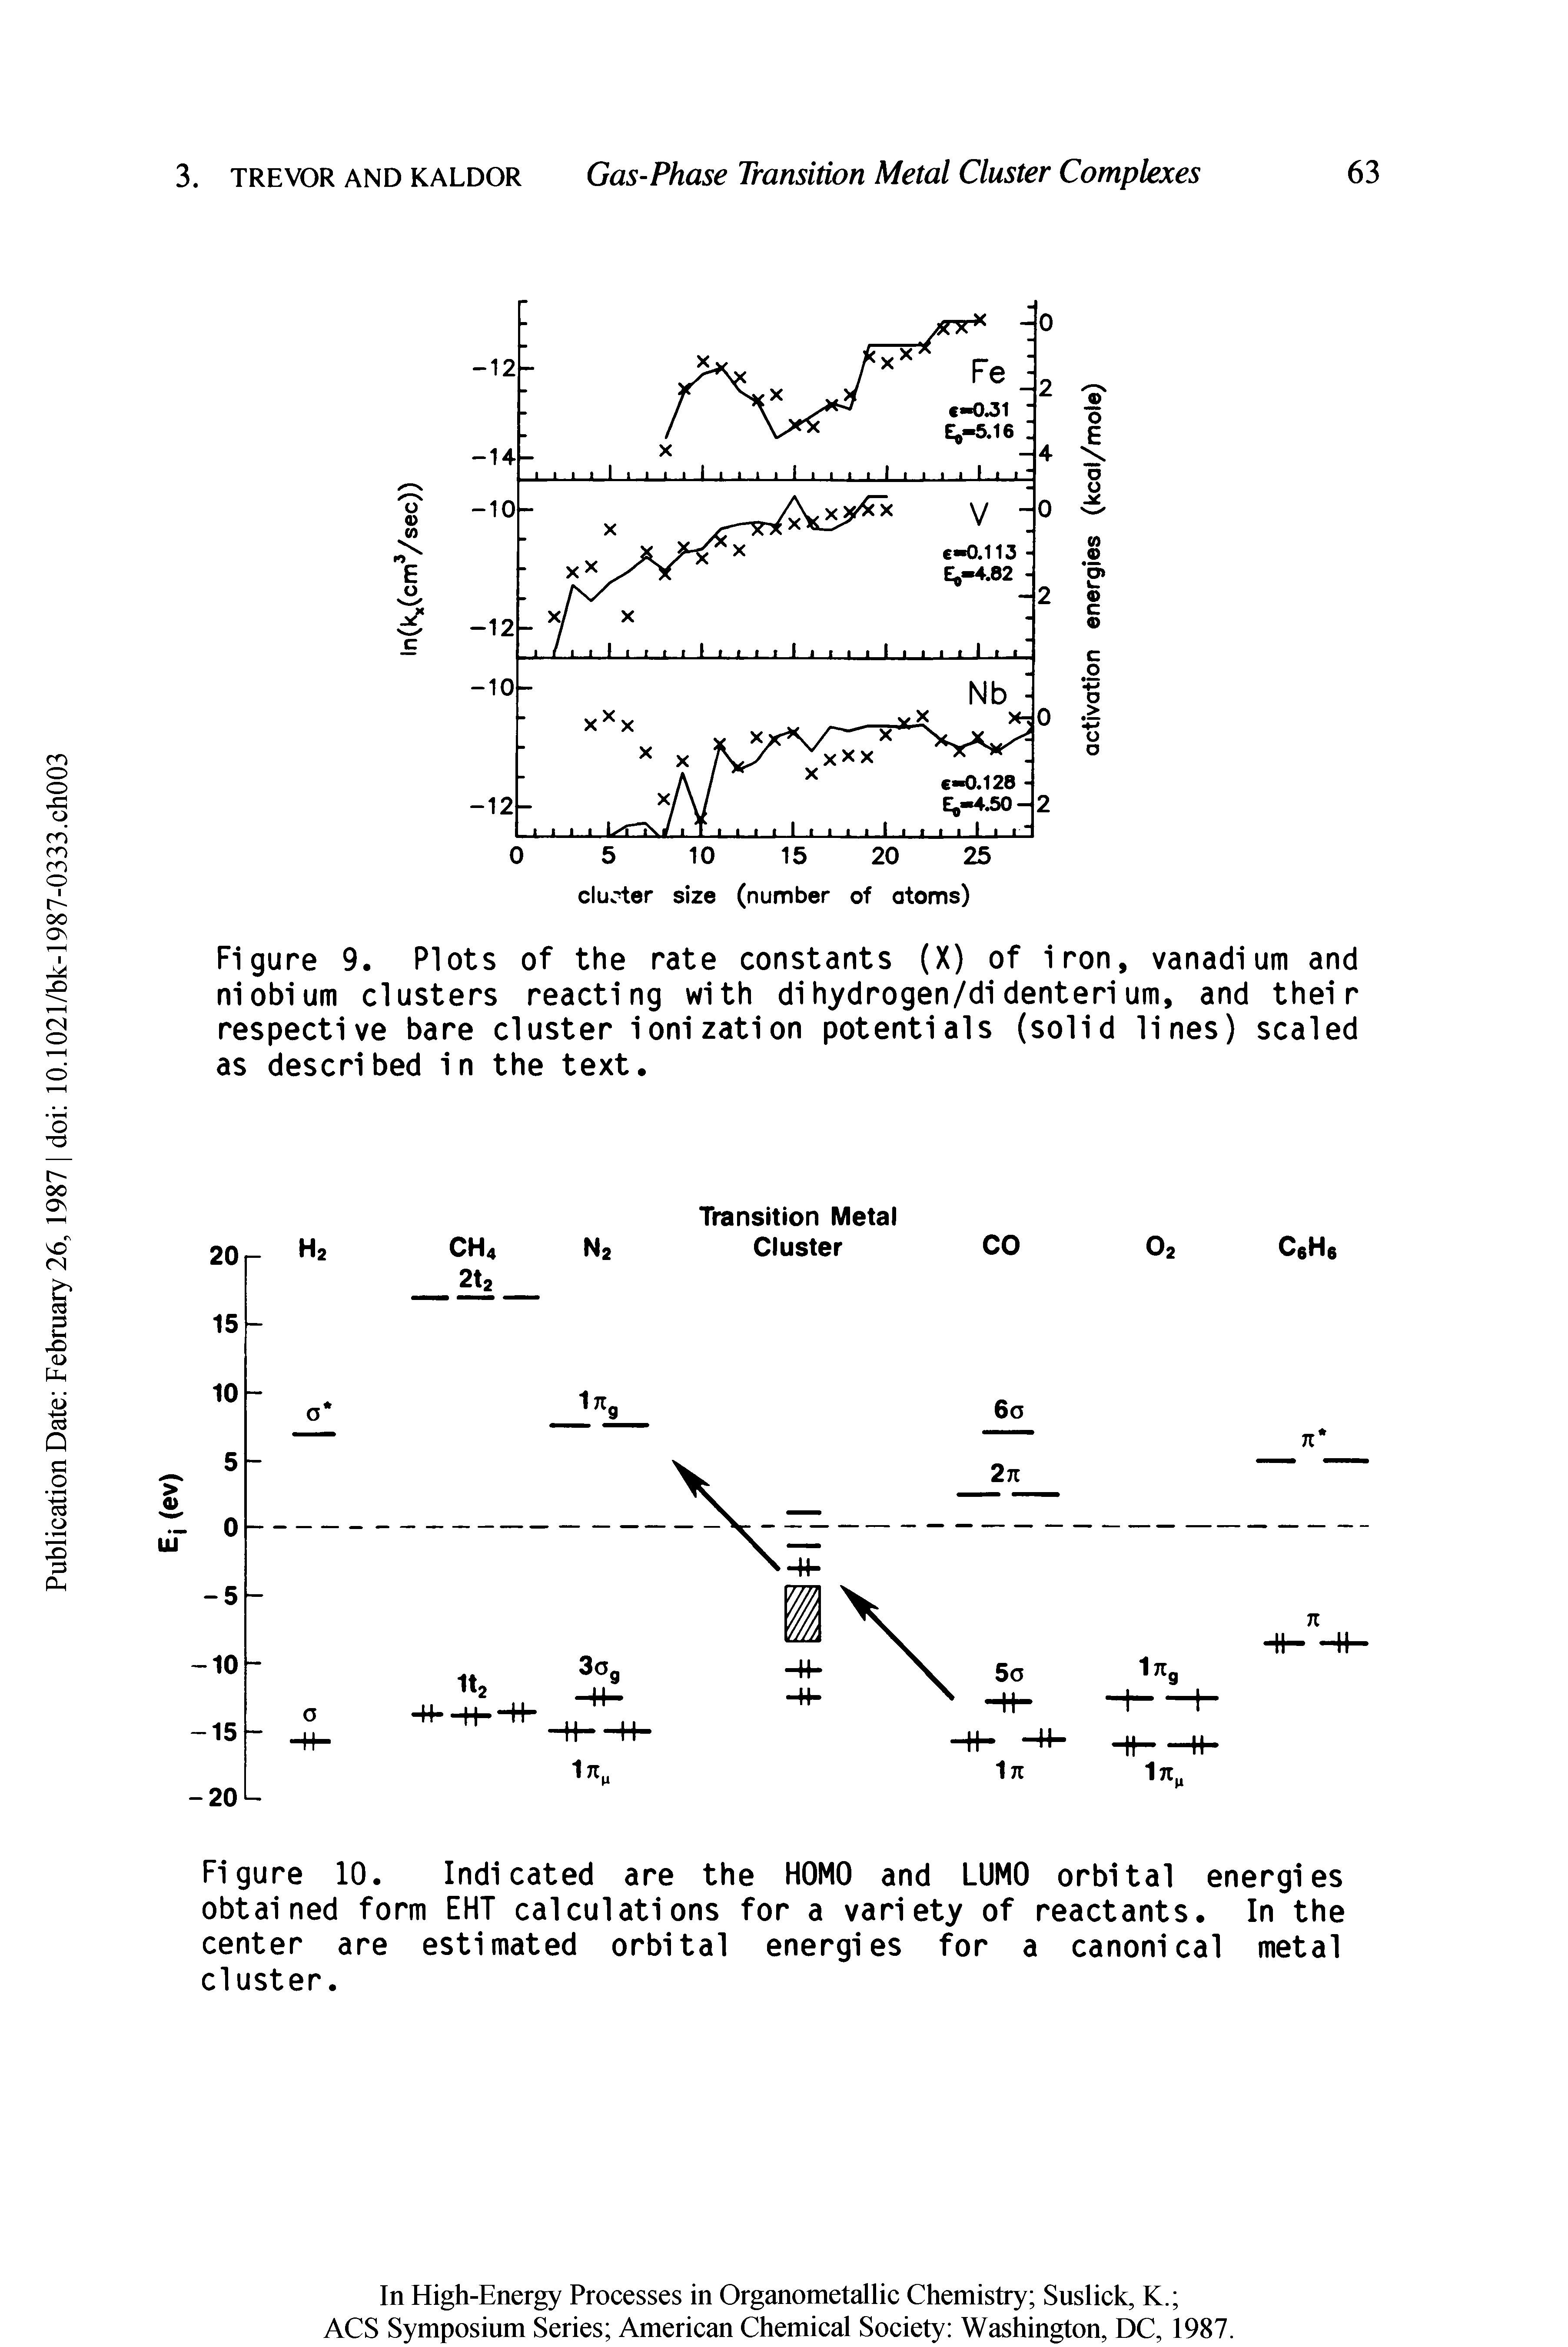 Figure 9. Plots of the rate constants (X) of iron, vanadium and niobium clusters reacting with di hydrogen/di denteri urn, and their respective bare cluster ionization potentials (solid lines) scaled as described in the text.